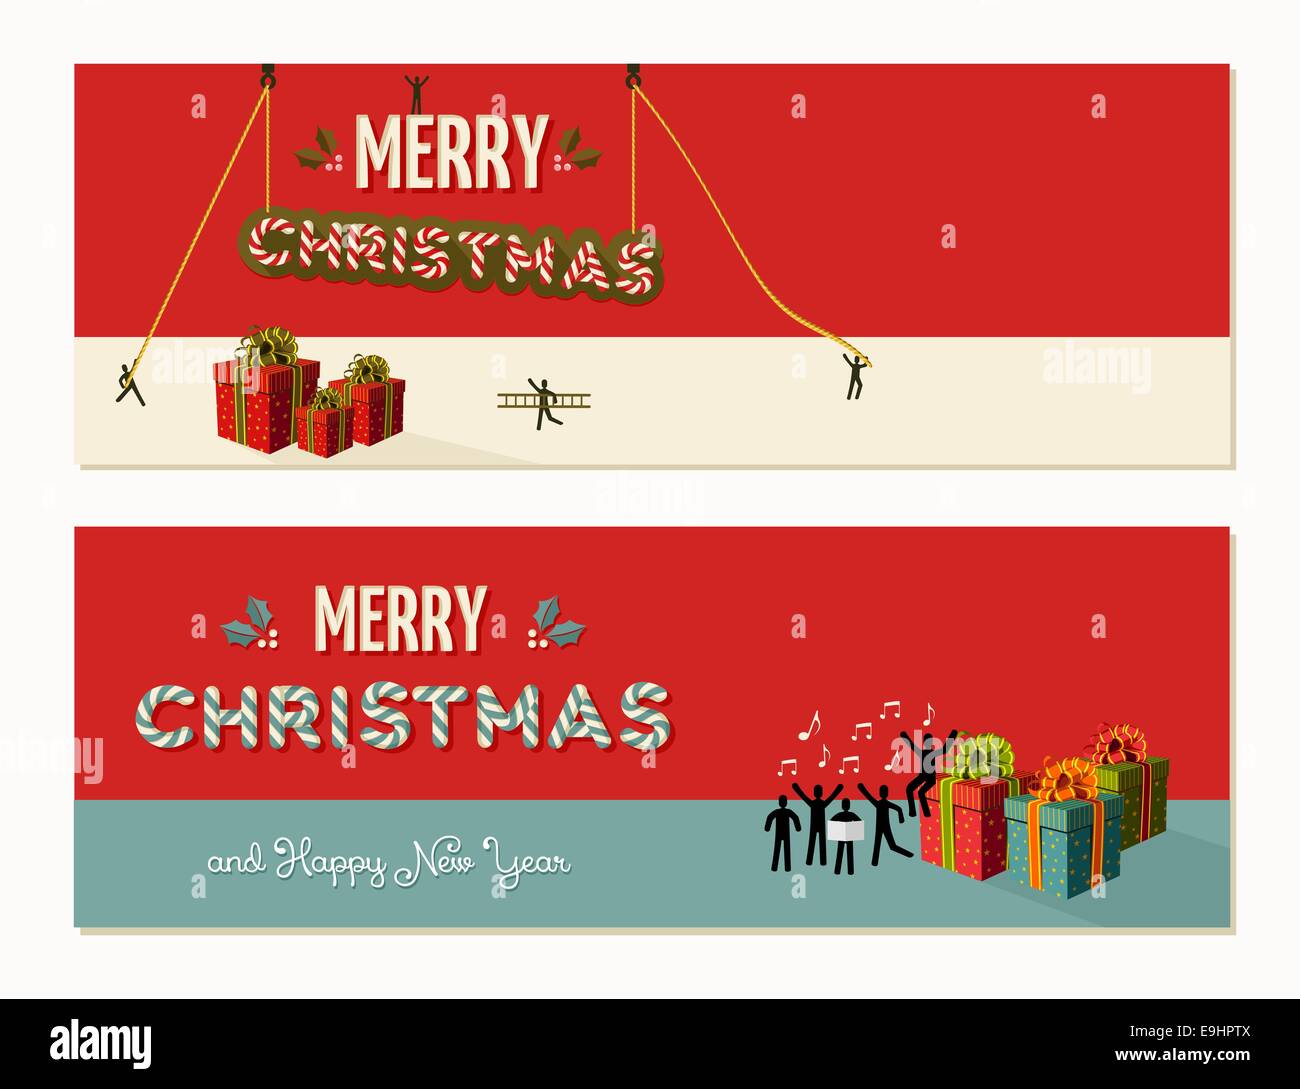 Teamwork collaborative work for Christmas banner design. EPS10 vector illustration organized in layers for easy editing. Stock Photo